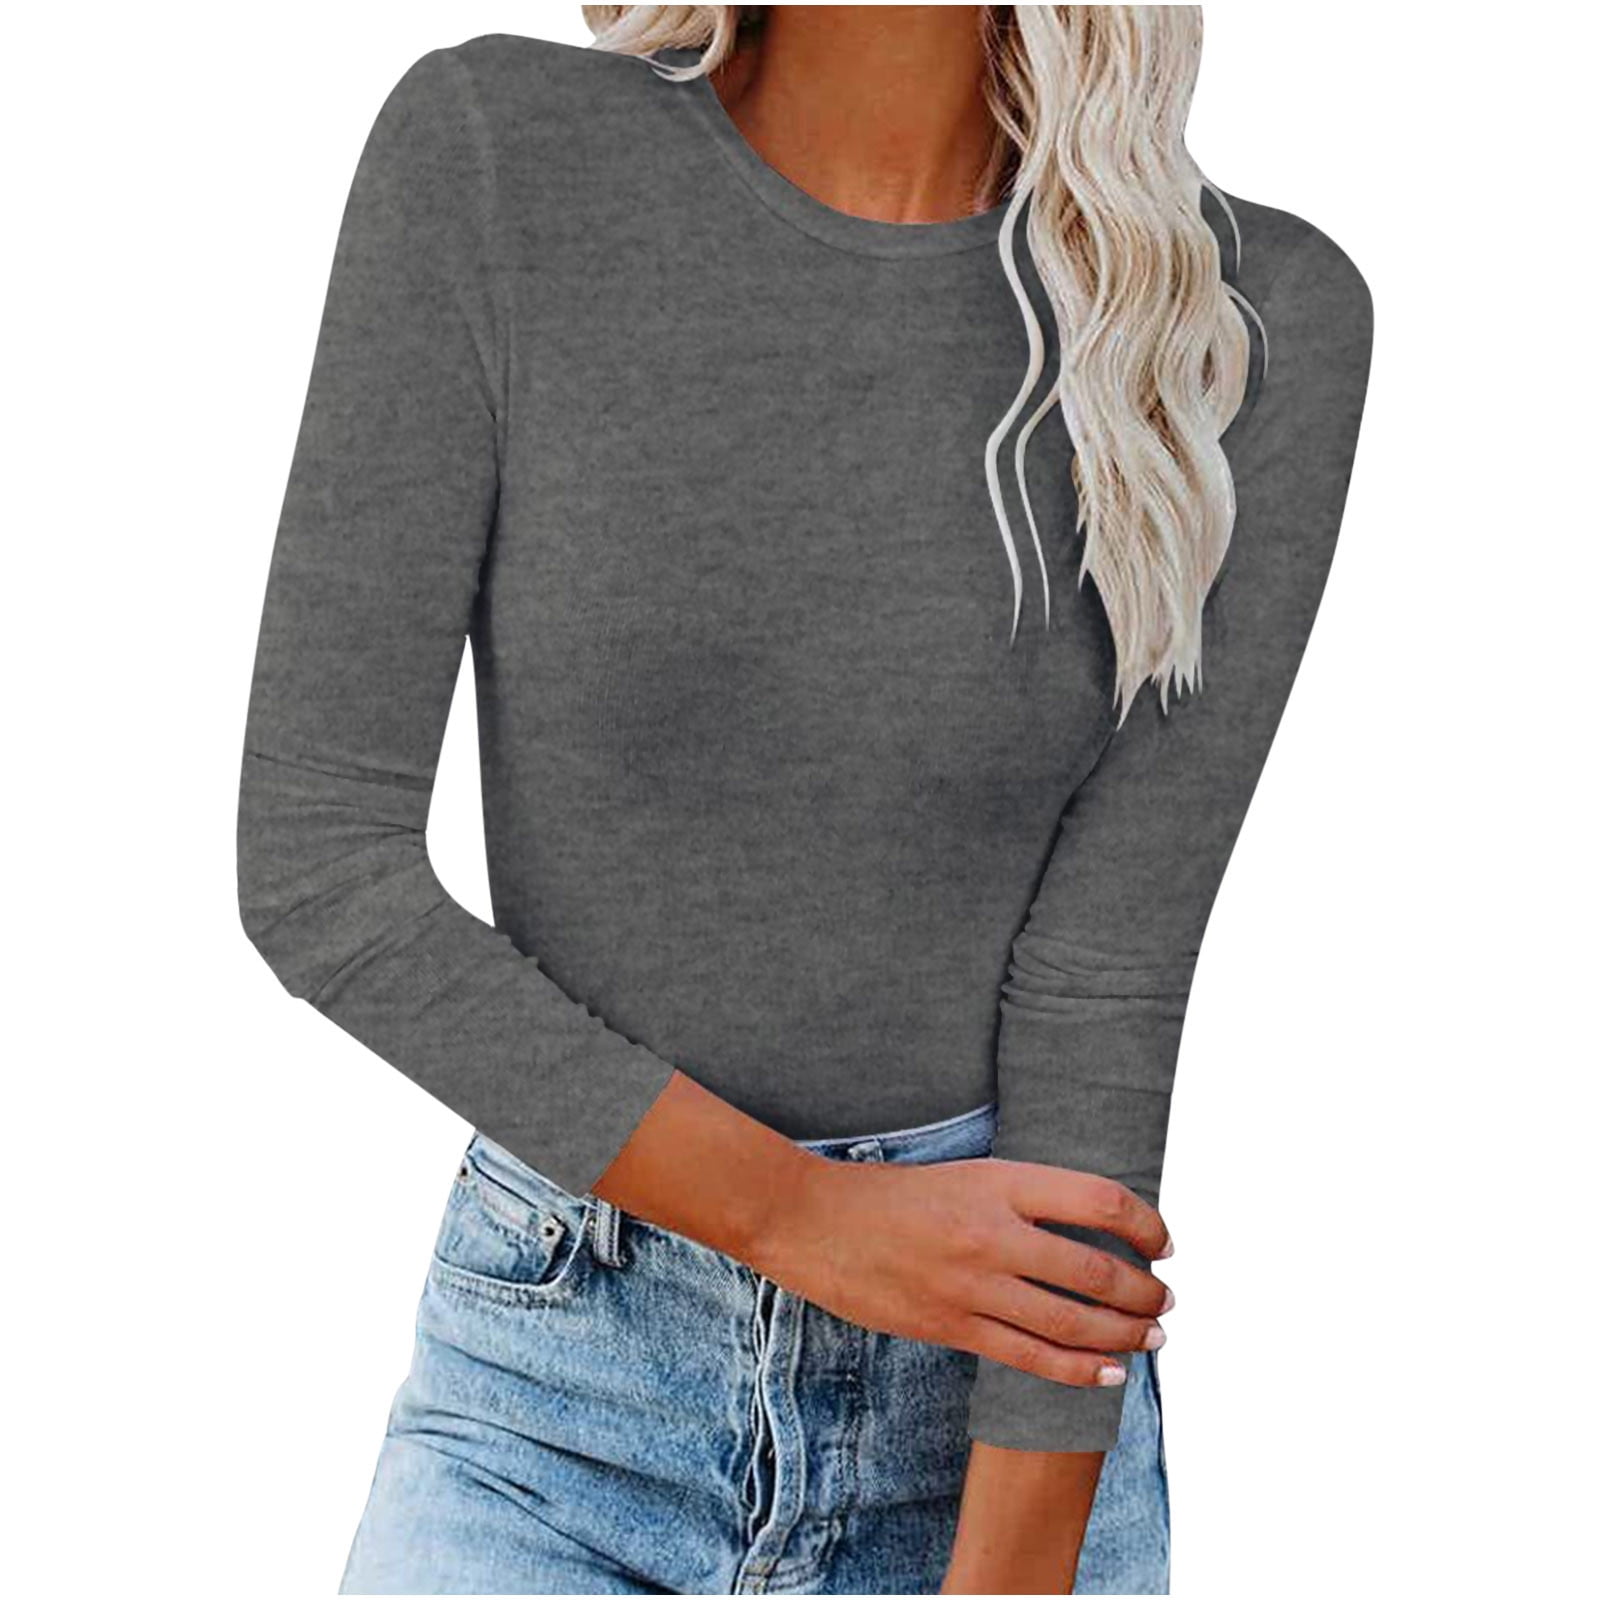 Hfyihgf Going Out Tops for Women Sexy Casual Long Sleeve Solid T Shirt  Crewneck Stretch Slim Fit Spring Fall Tees Top Y2k Clothing(Dark Gray,L) 